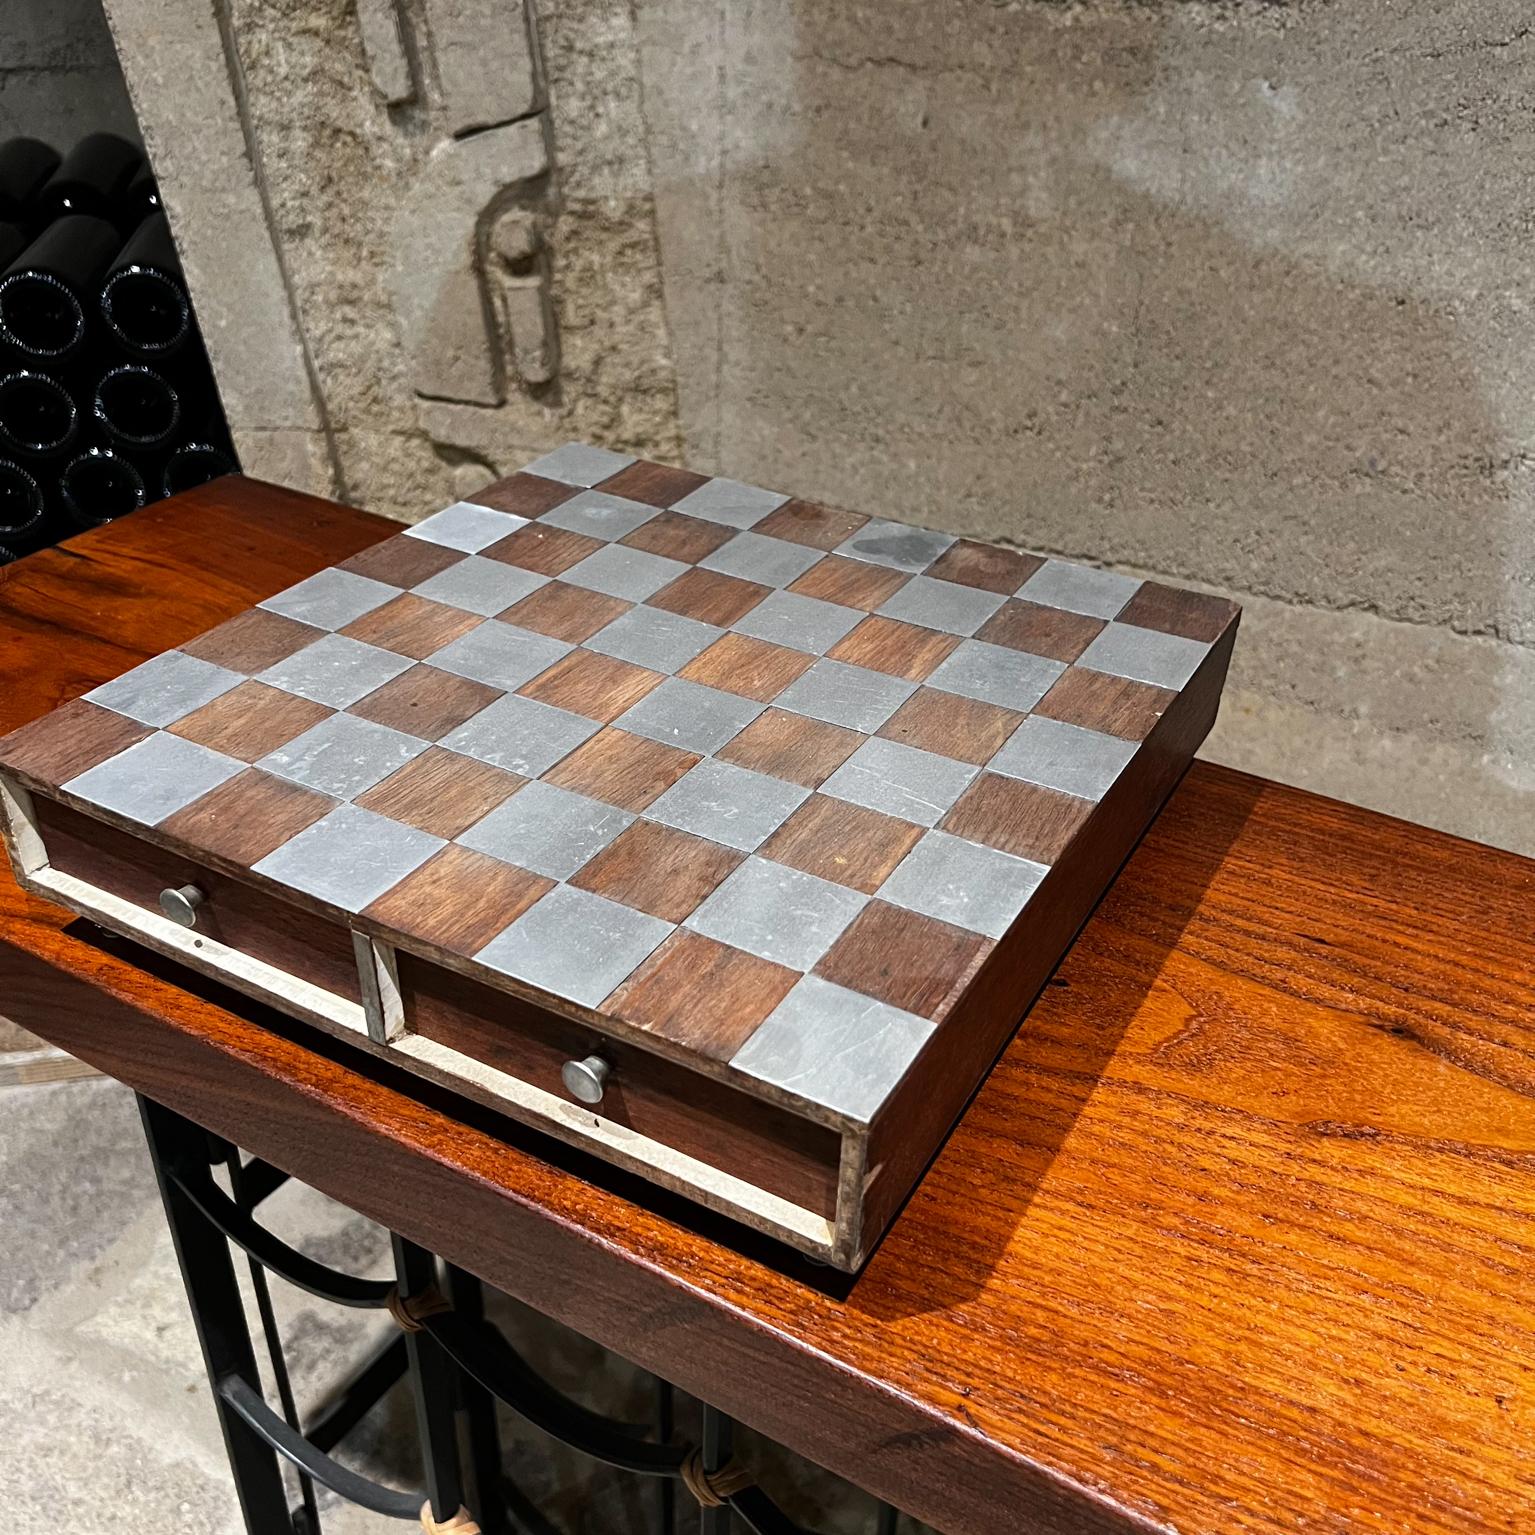 1960s Modern chess game set in aluminum and walnut wood 
Unmarked
Preowned vintage condition. Some pieces have been restored. 
Refer to all images please.
Measures: 3 tall x 12 x 12.25.